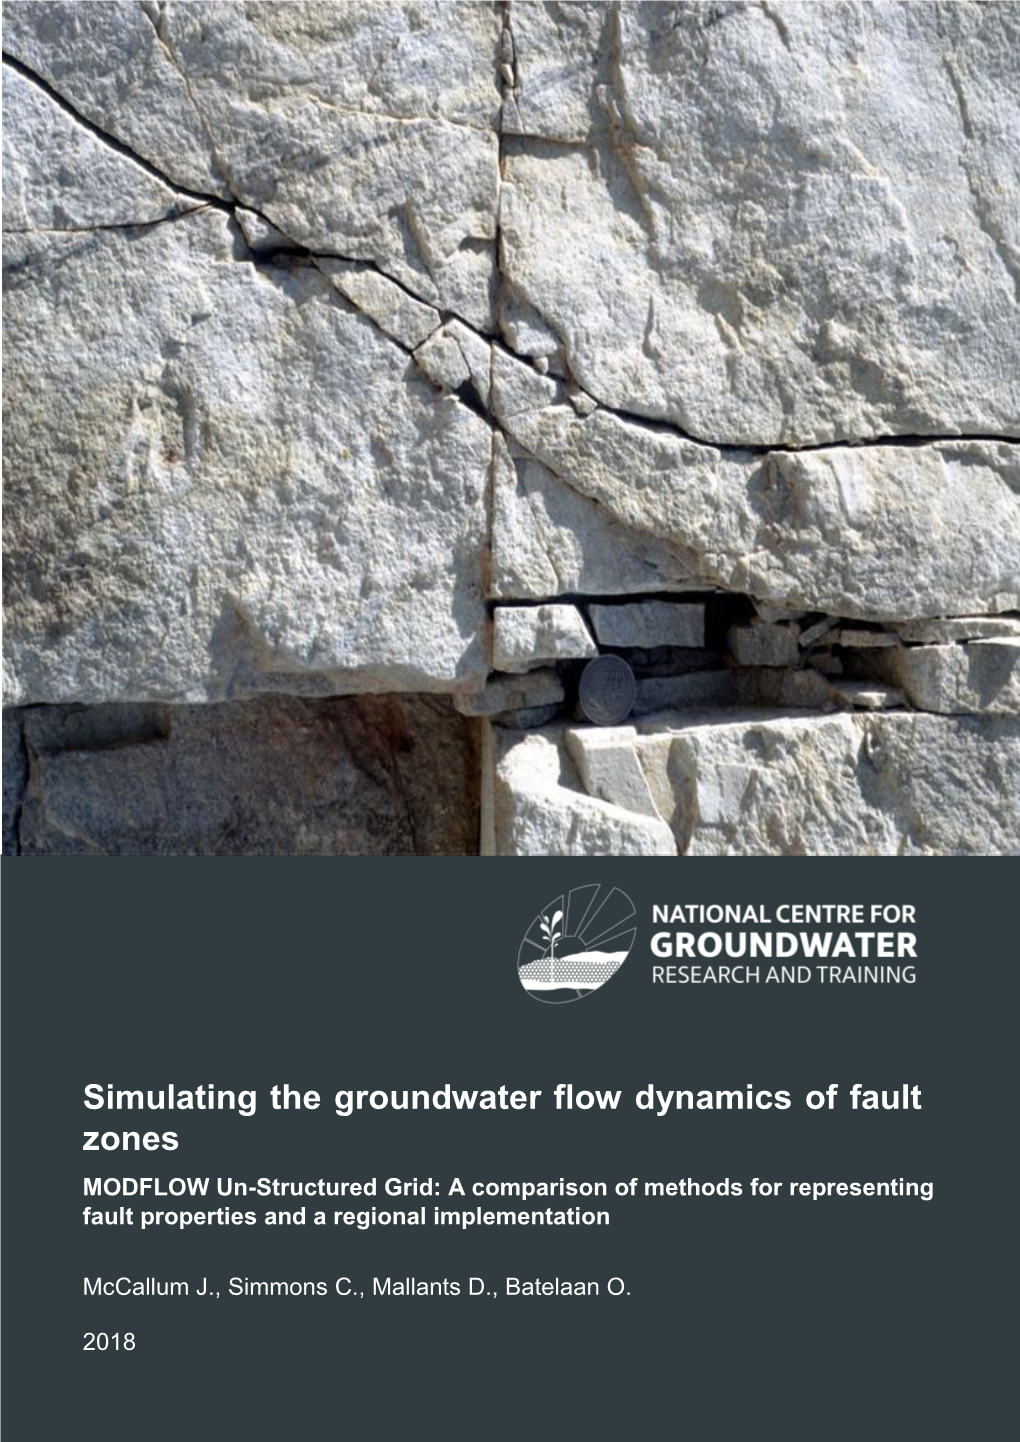 Simulating the Groundwater Flow Dynamics of Fault Zones